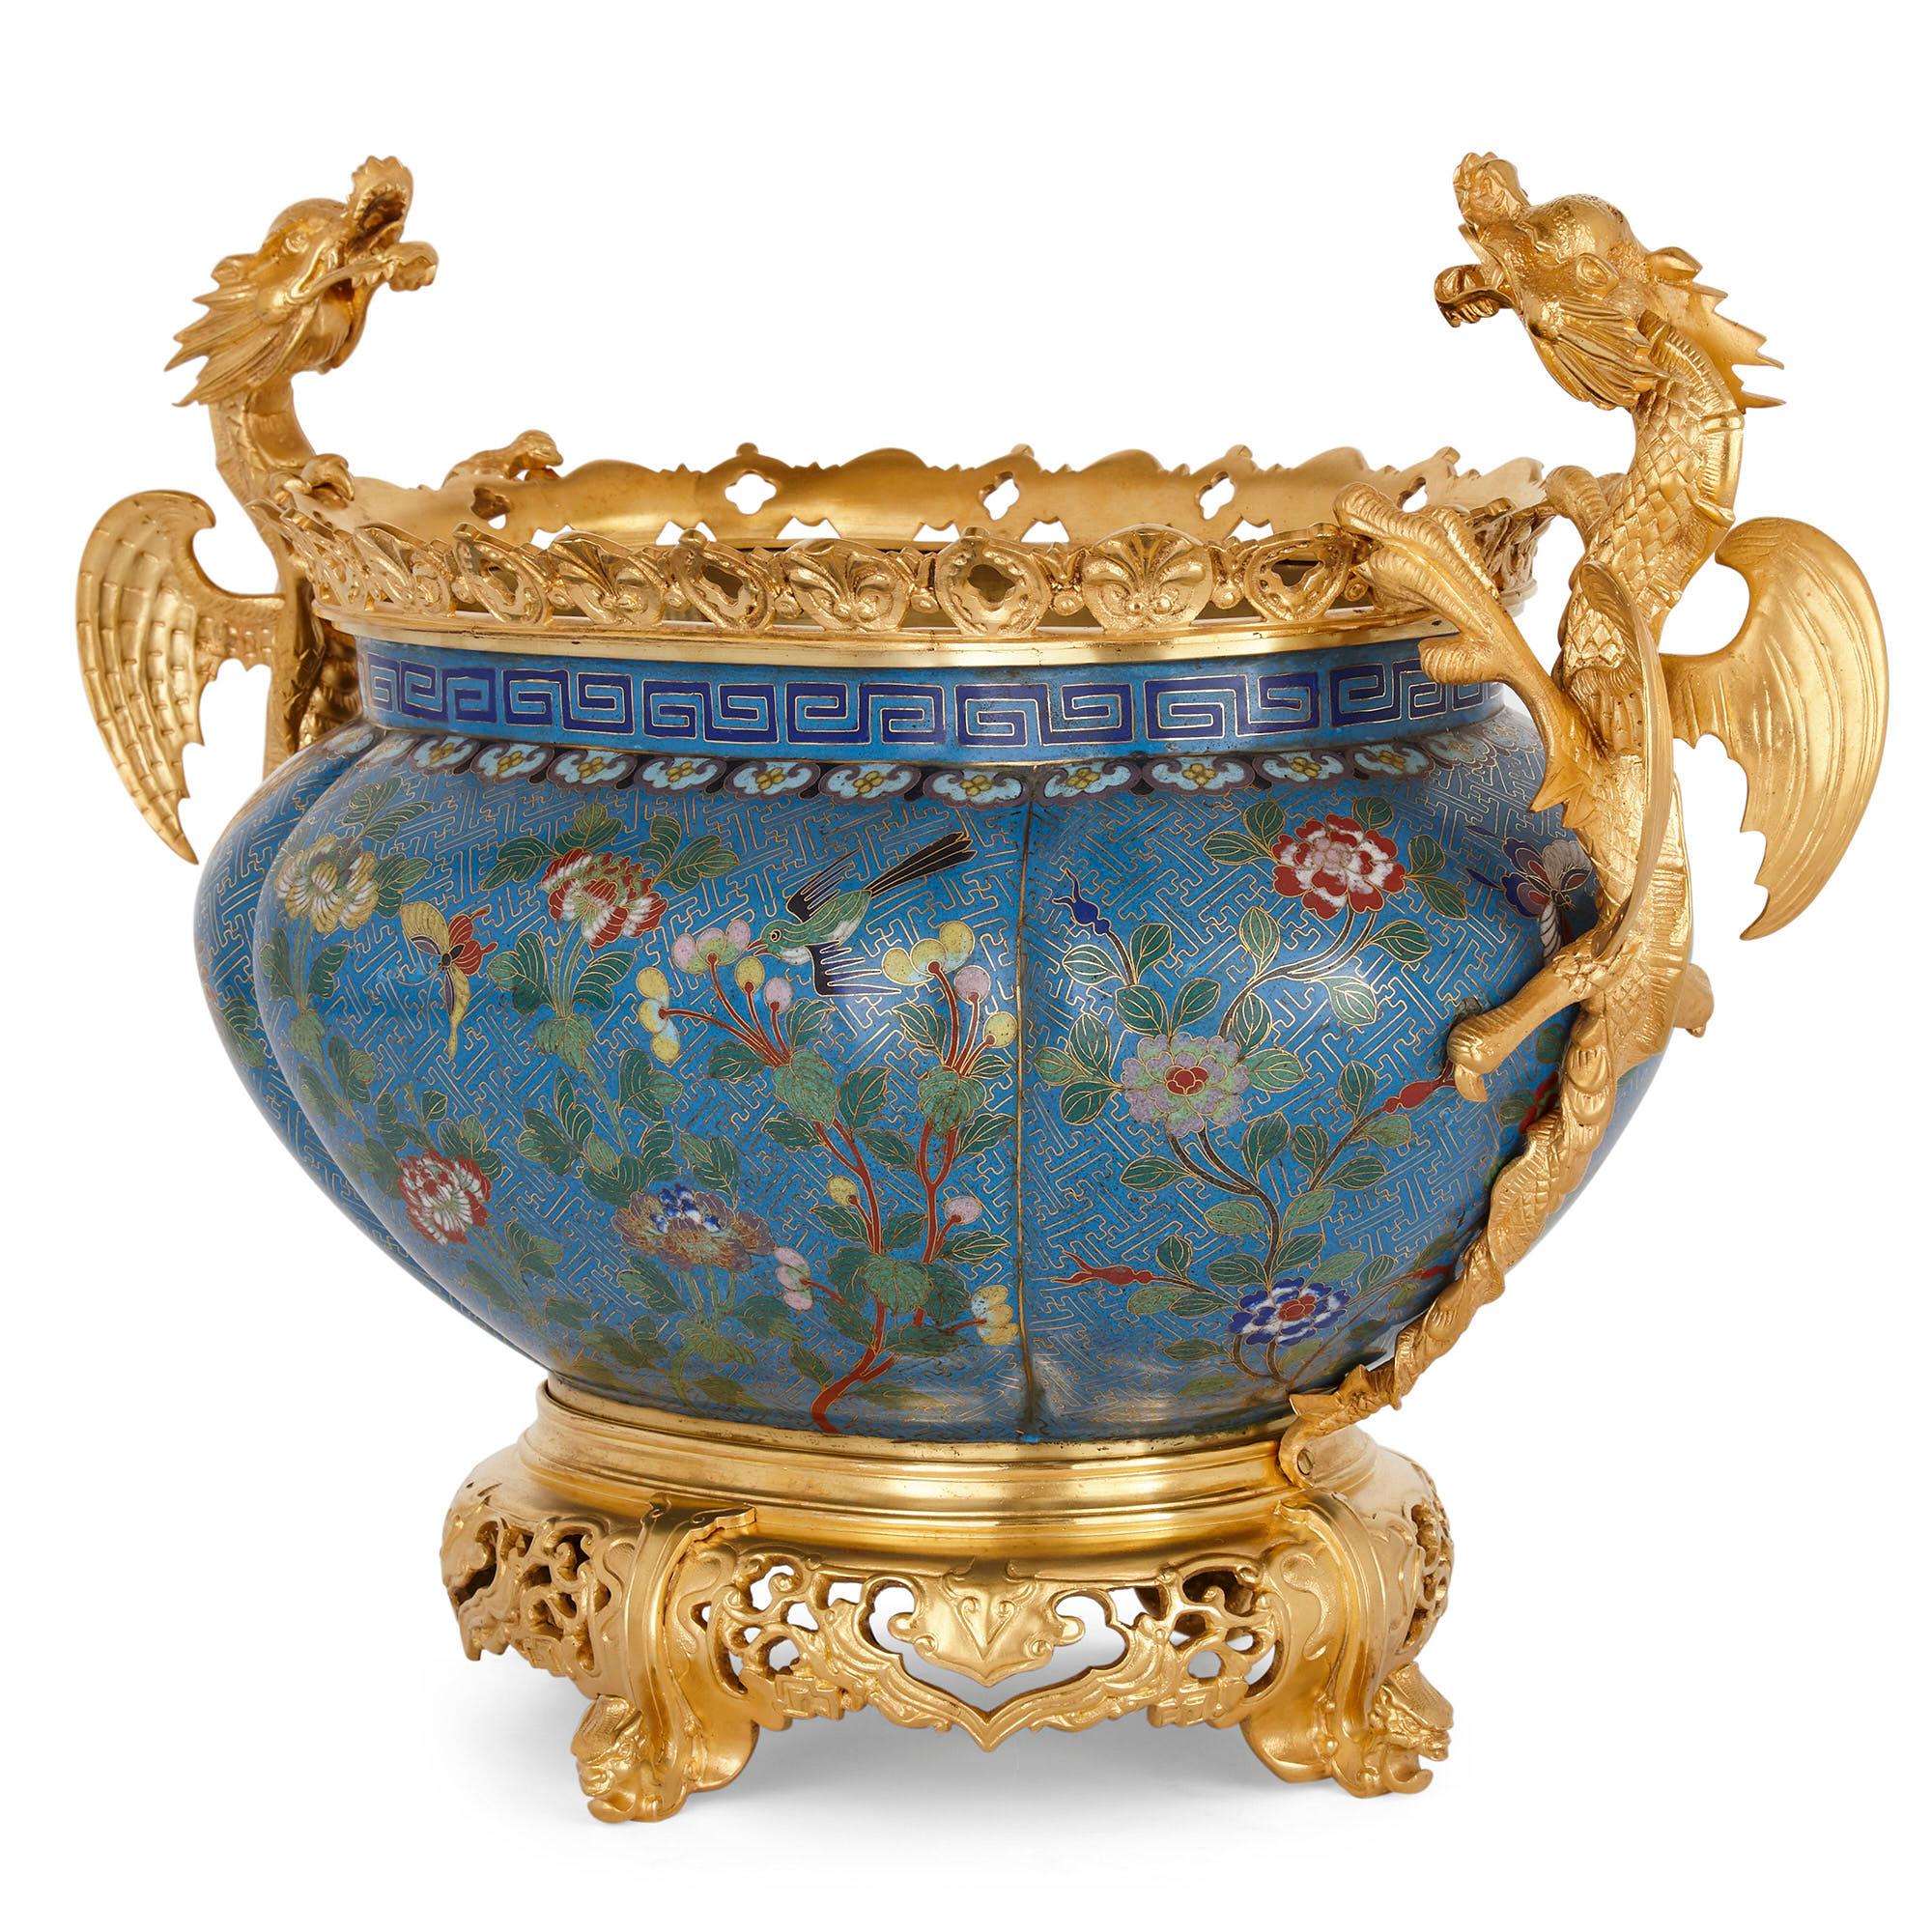 Chinese enamel and French gilt bronze Chinoiserie jardinière
The enamel Chinese and the gilt bronze French, 19th century
Measures: Height 40cm, width 53cm, depth 30cm.

This Chinoiserie style jardinière features a beautiful cloisonné enamel